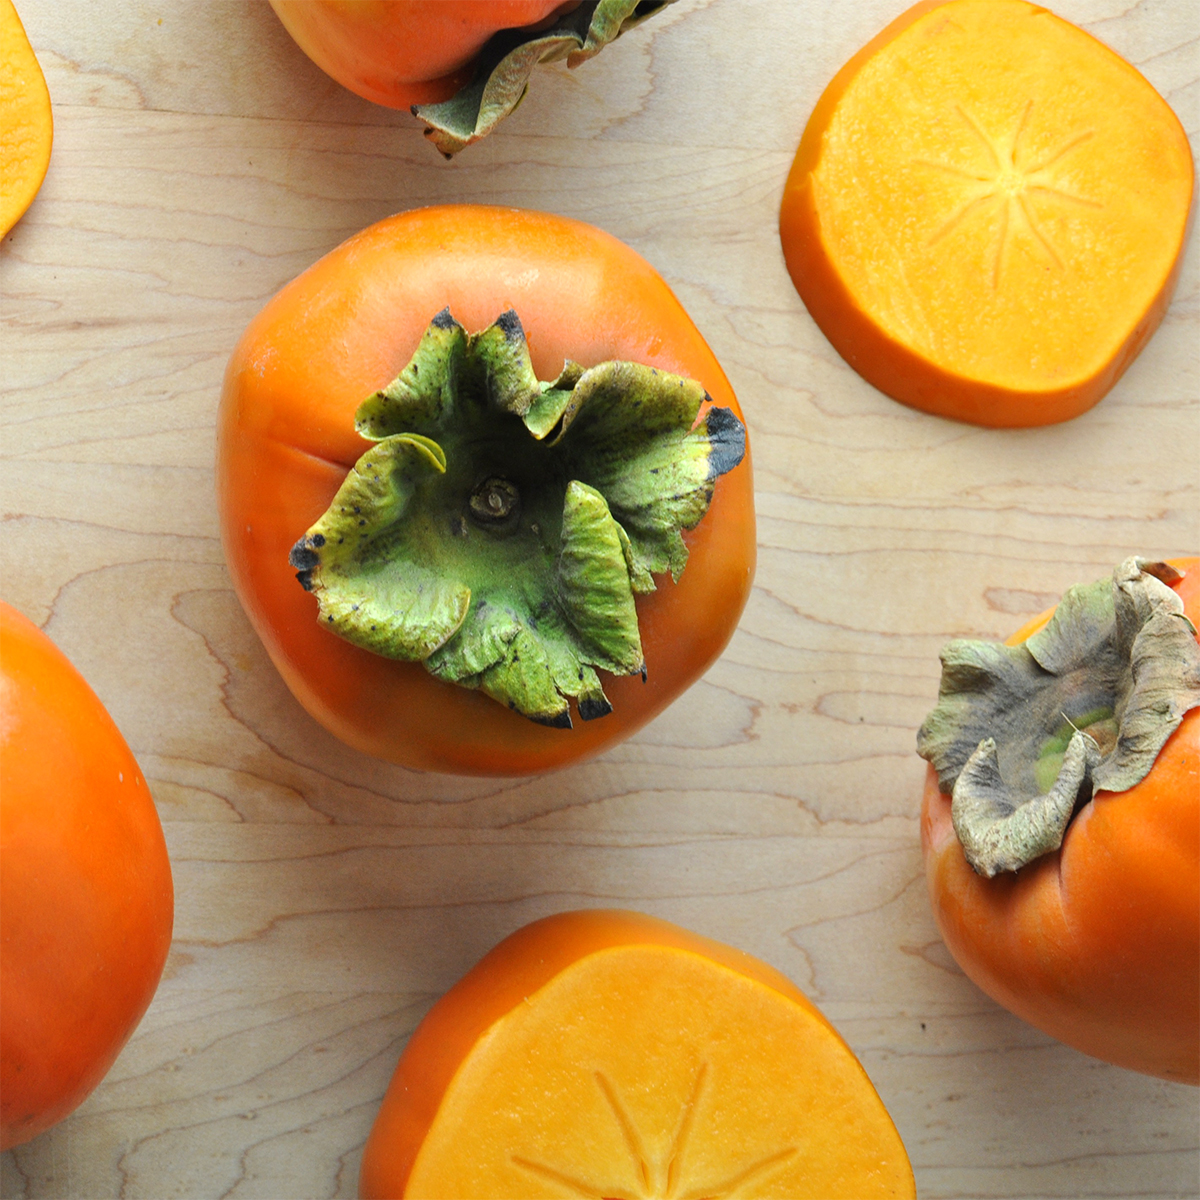 persimmon differences